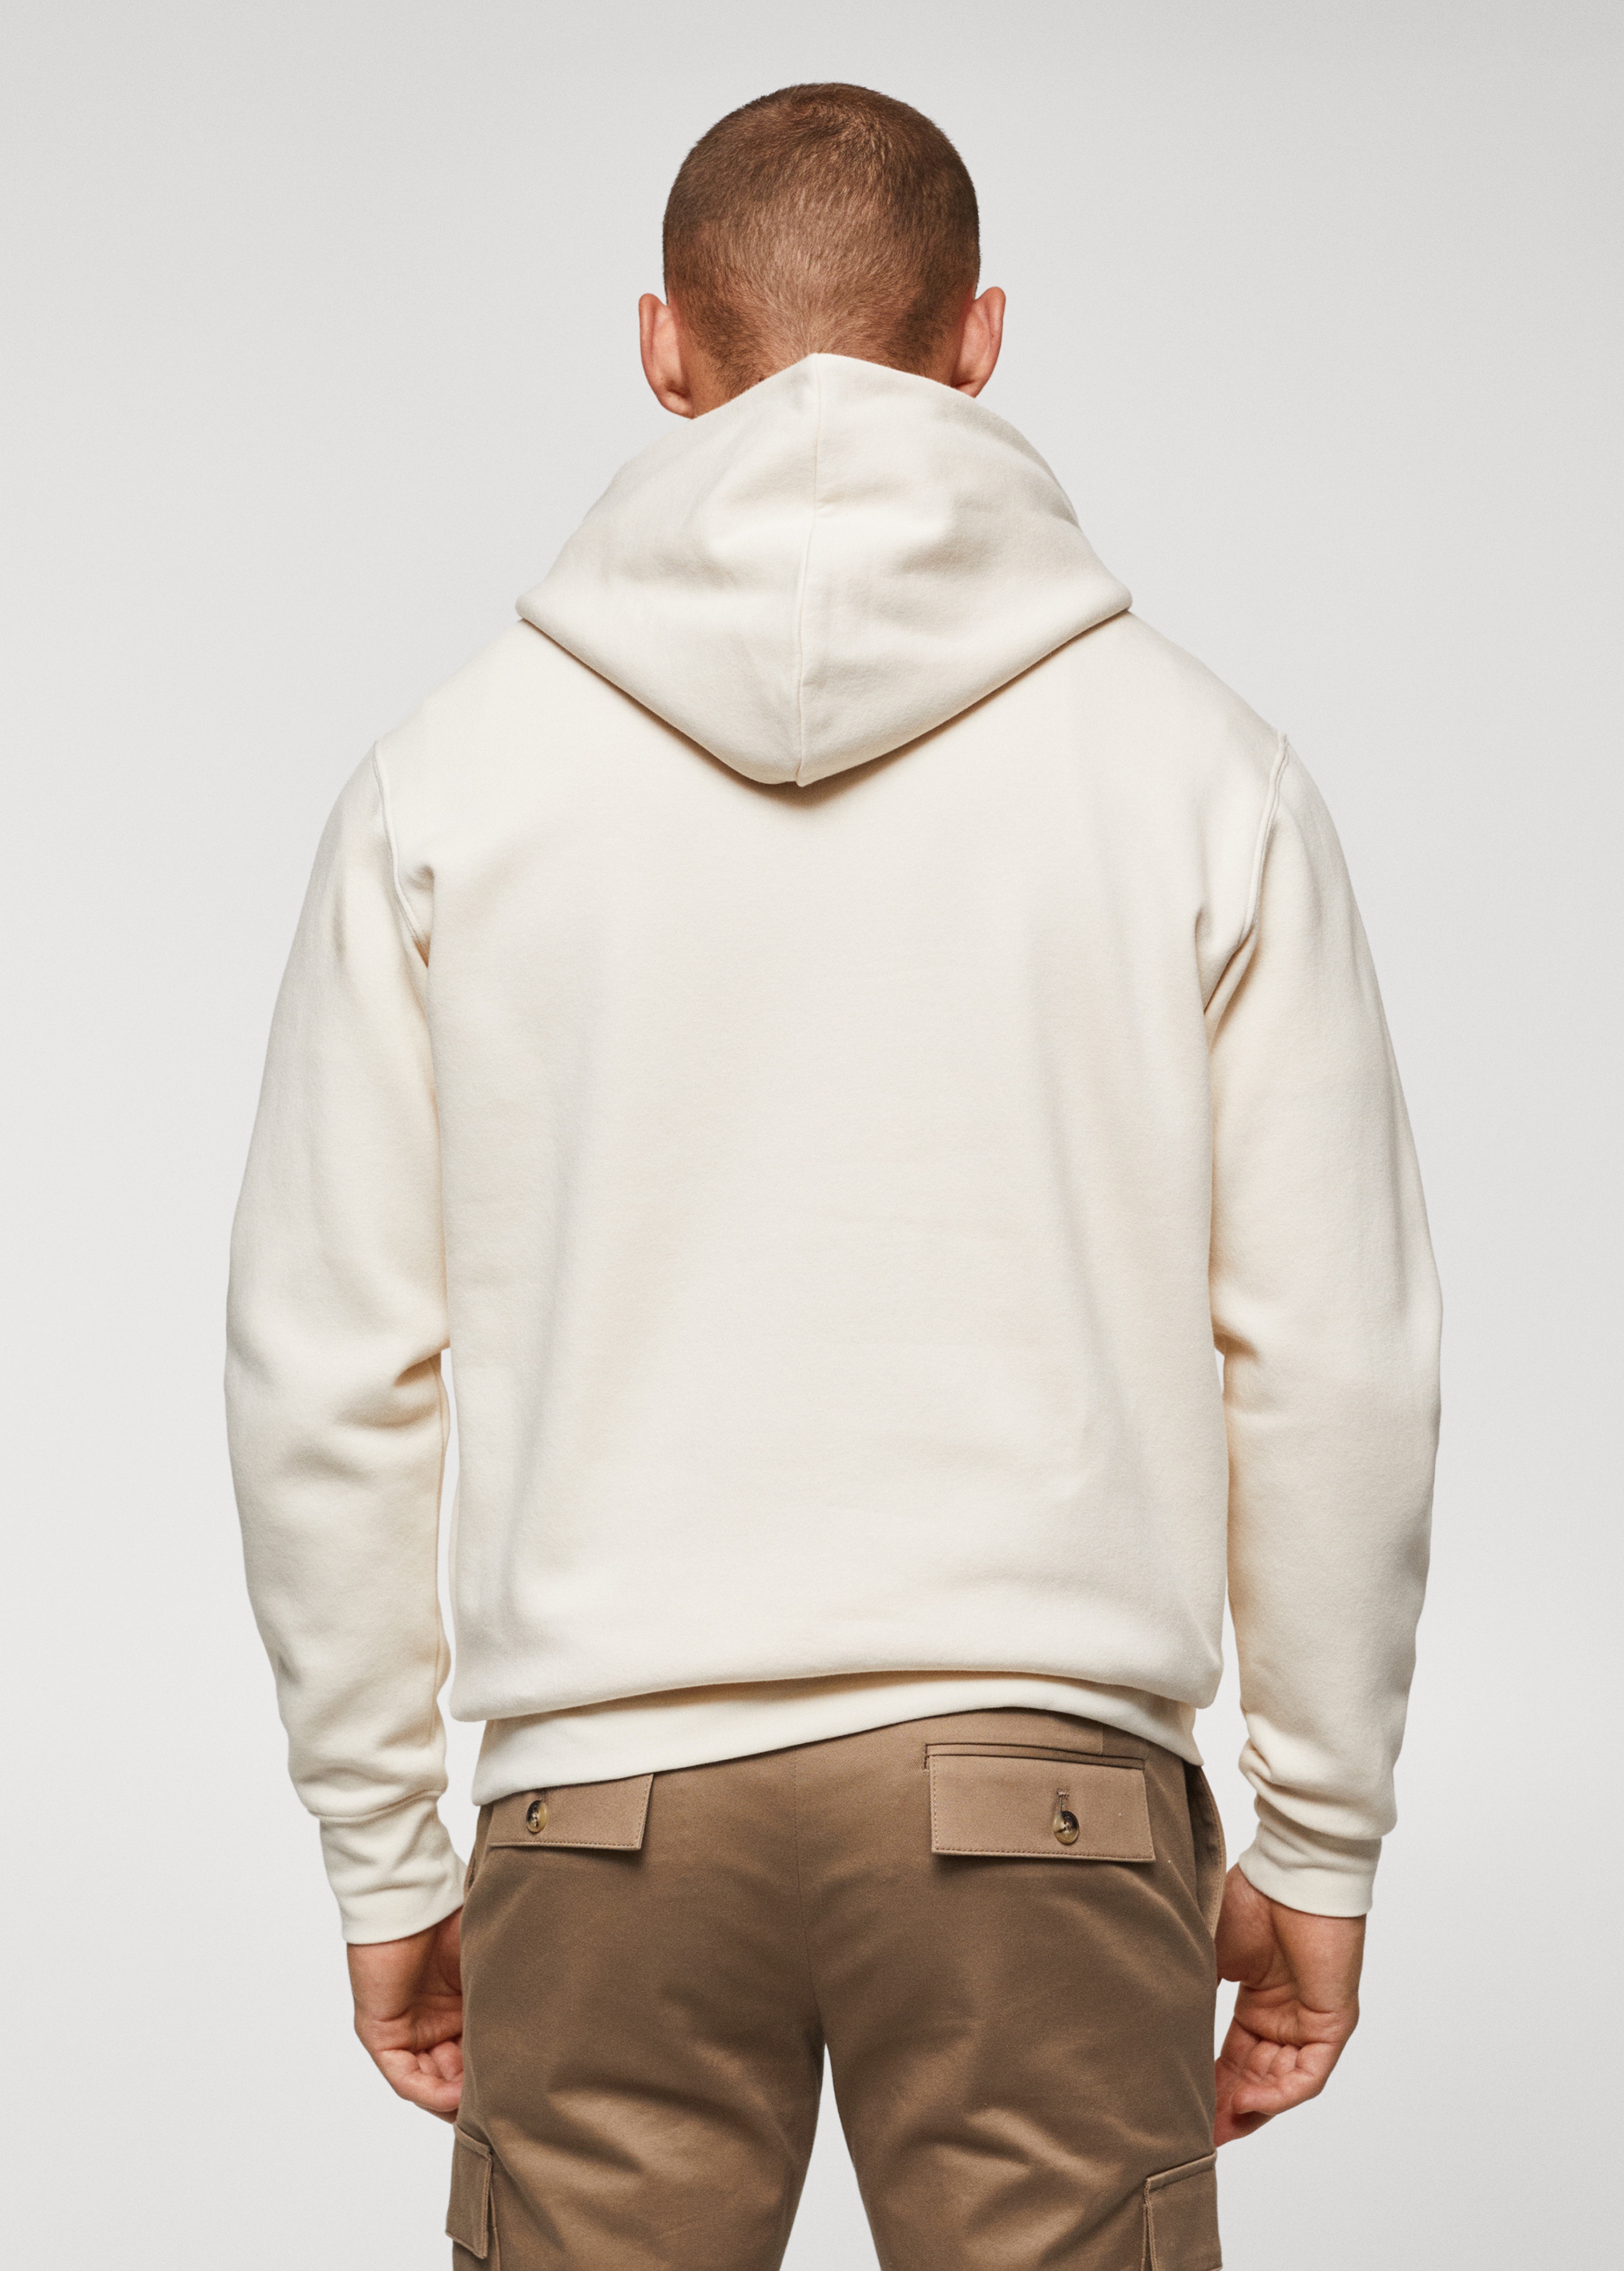 Cotton hooded sweatshirt text - Reverse of the article